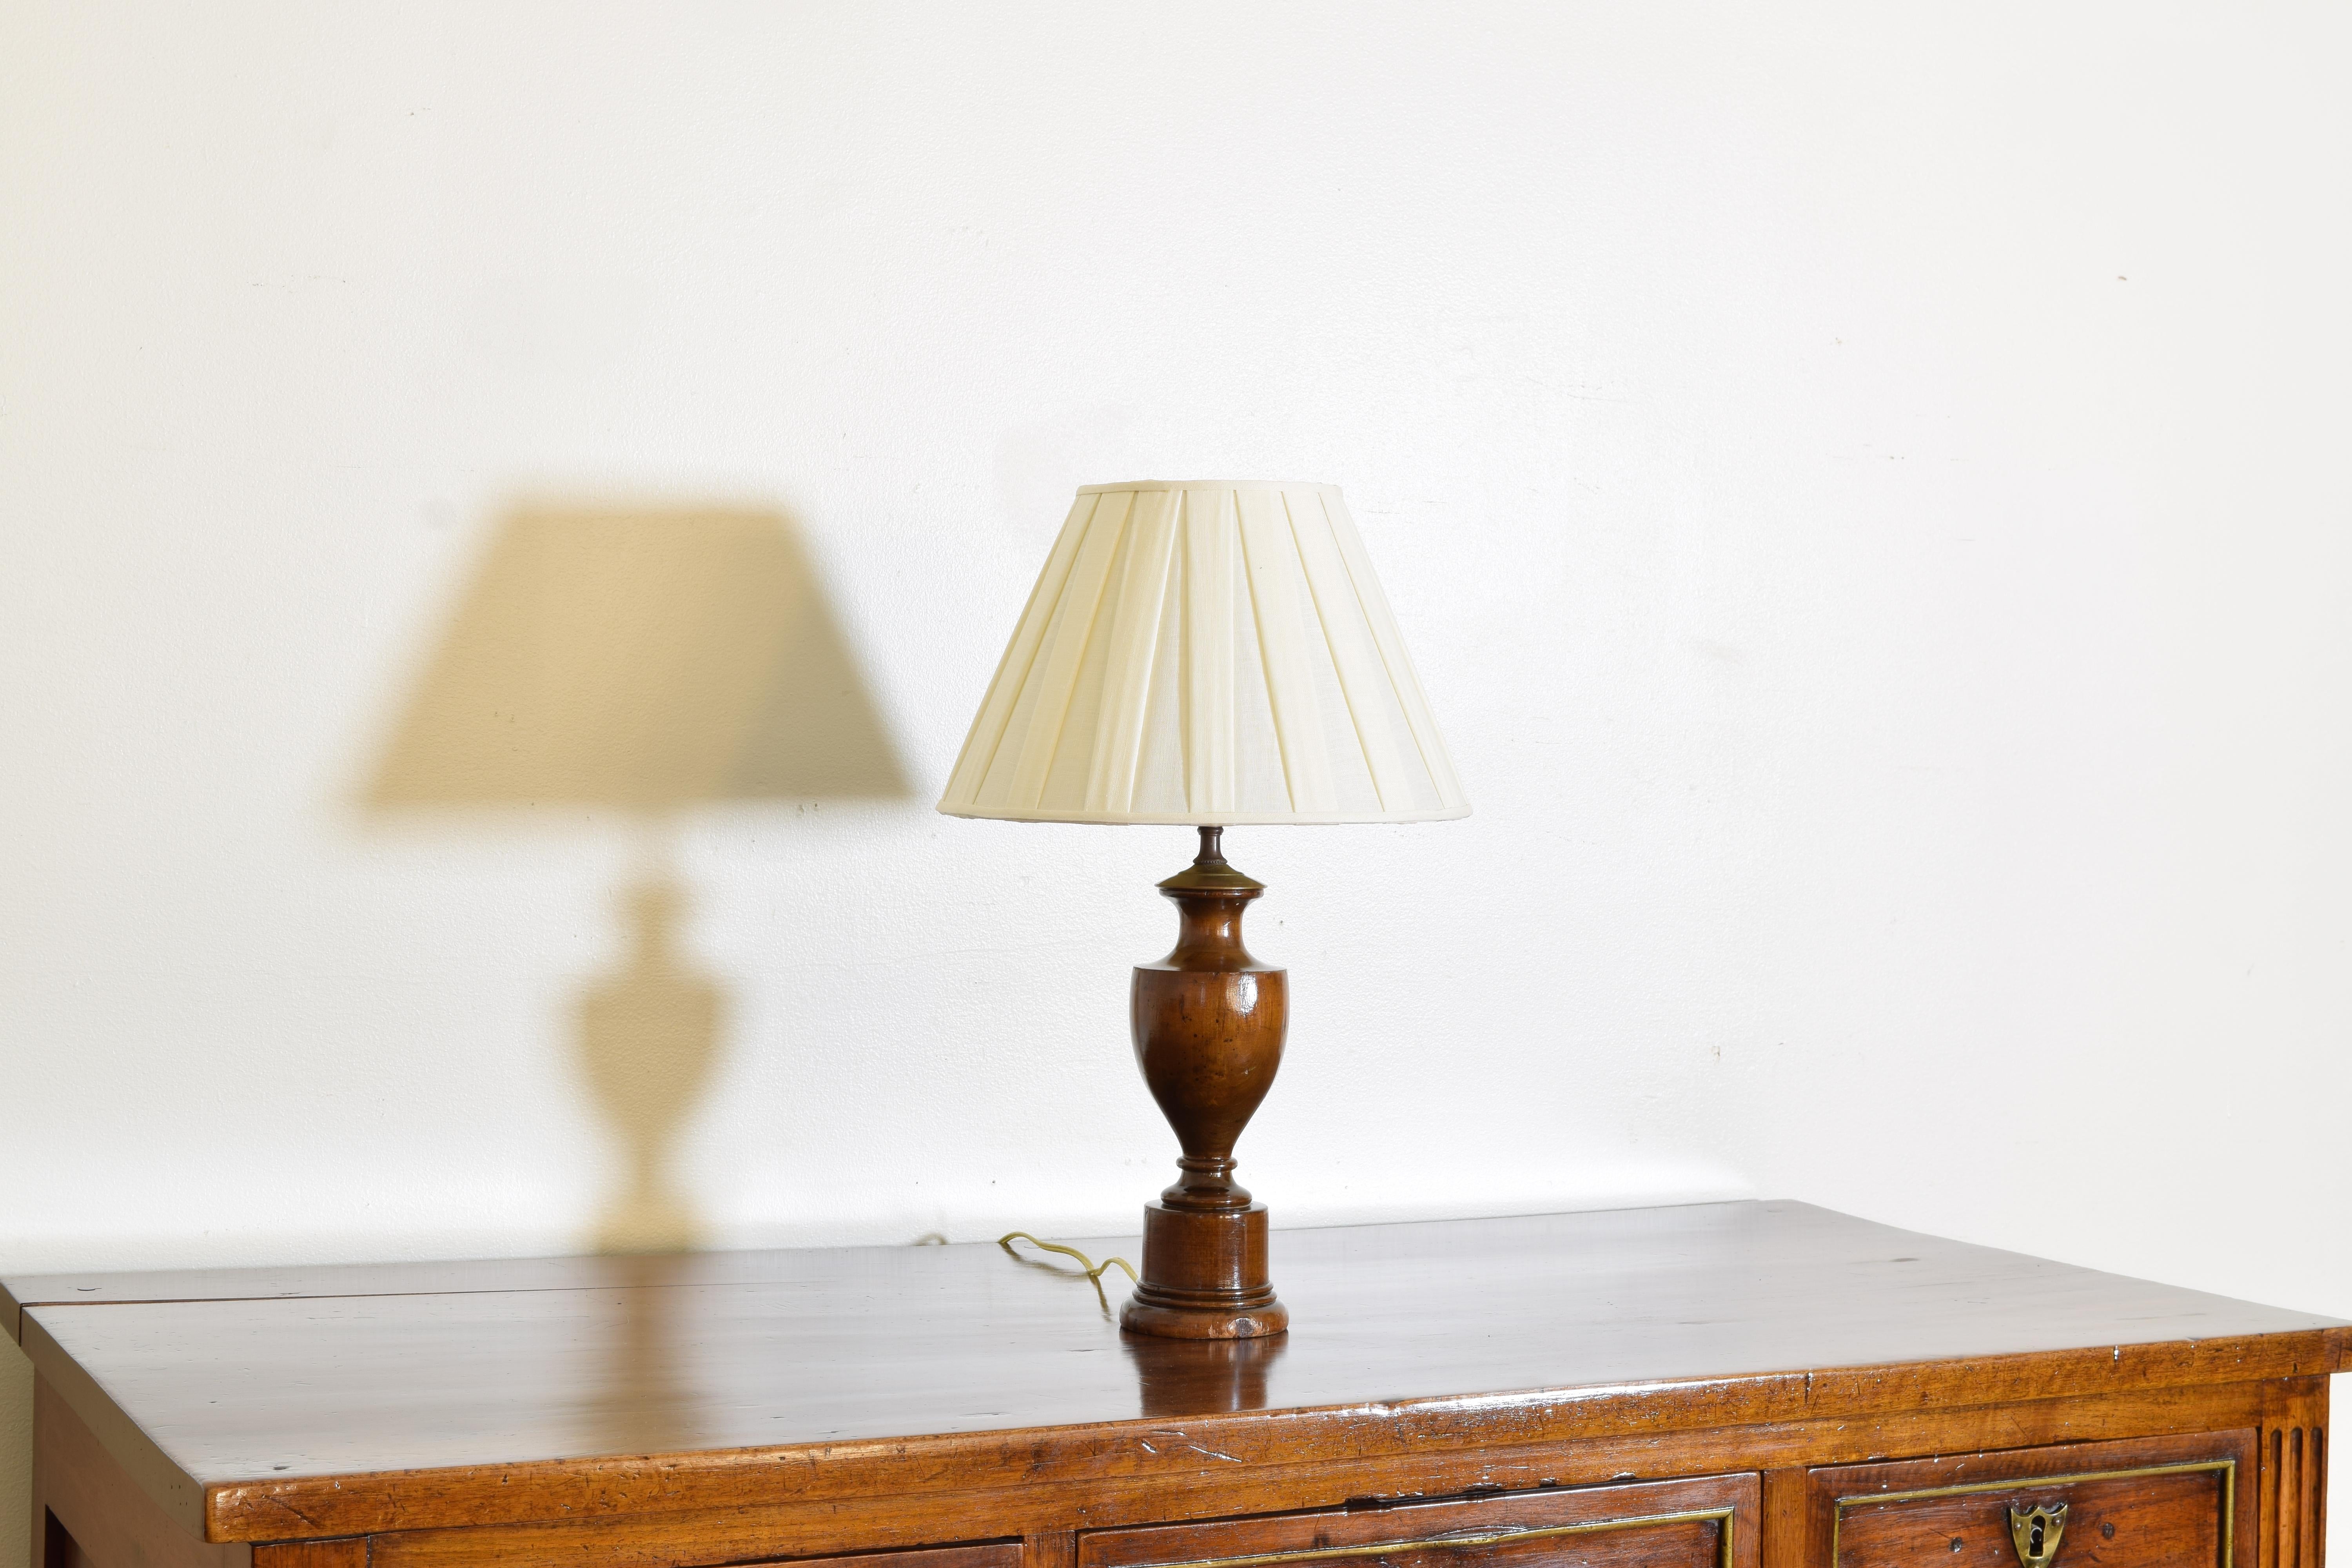 European Continental Neoclassical Style Turned Walnut Urn-Form Table Lamp, ca. 1900.